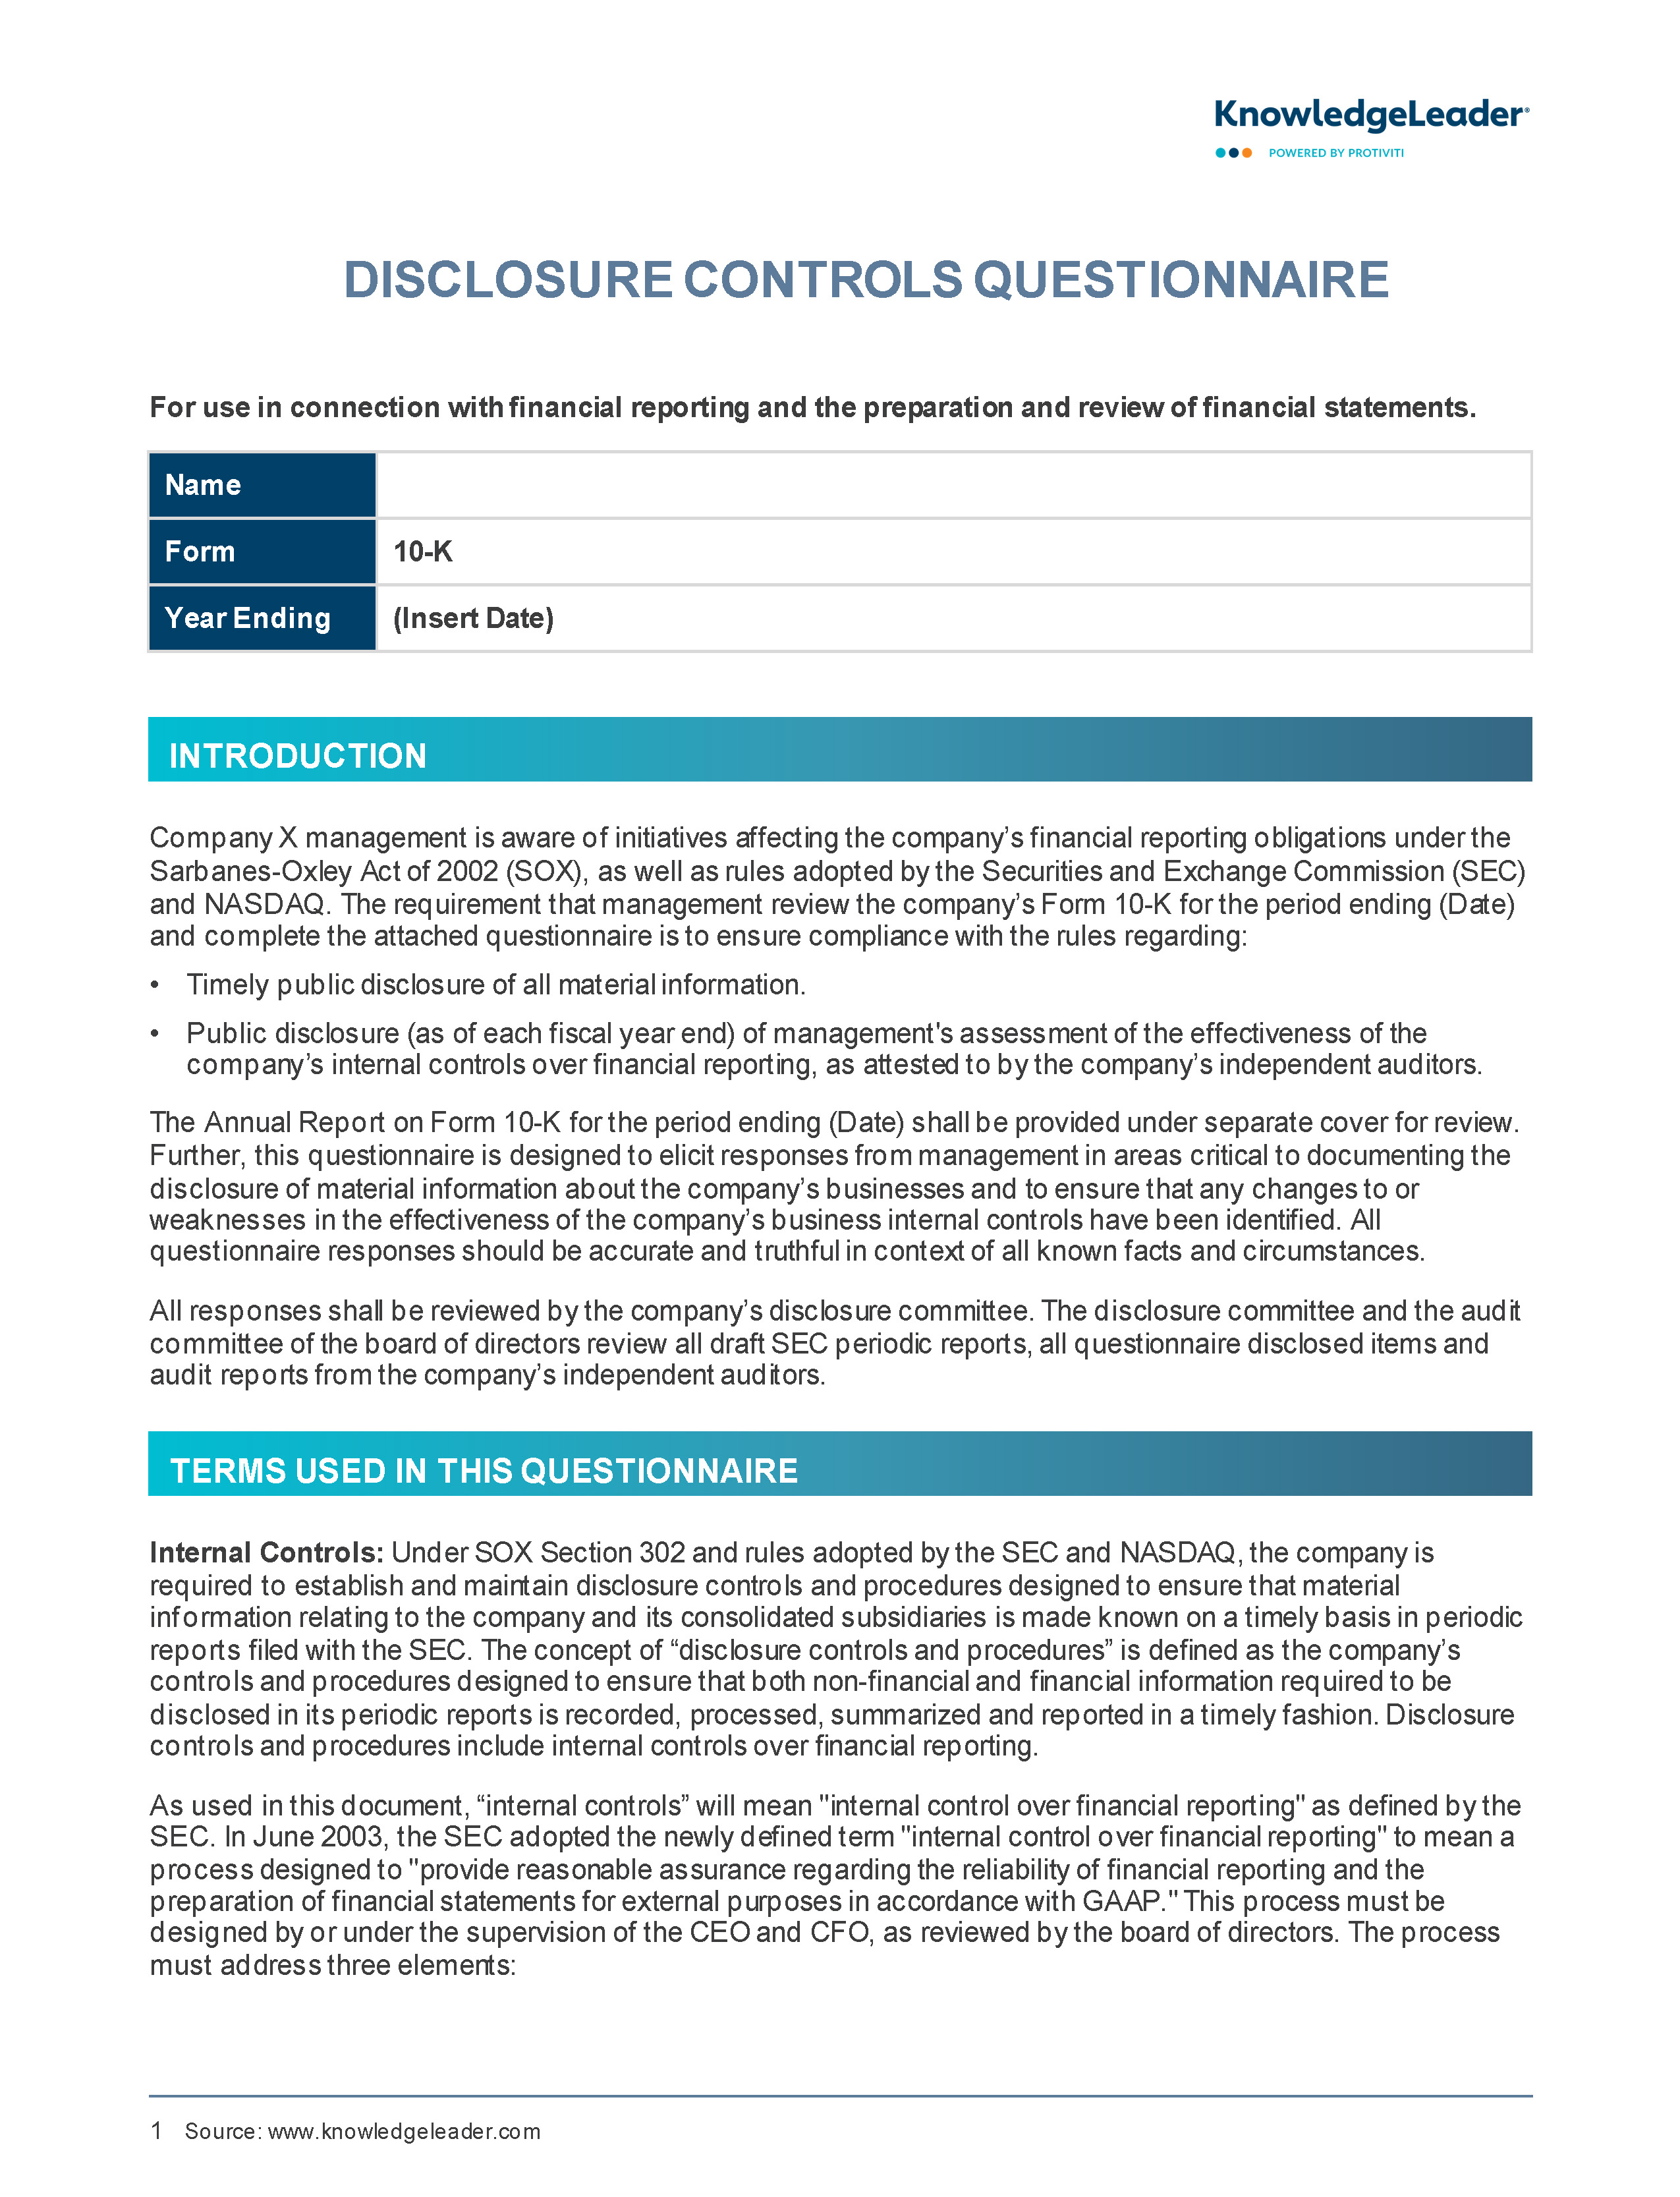 Screenshot of the first page of Disclosure Controls Questionnaire